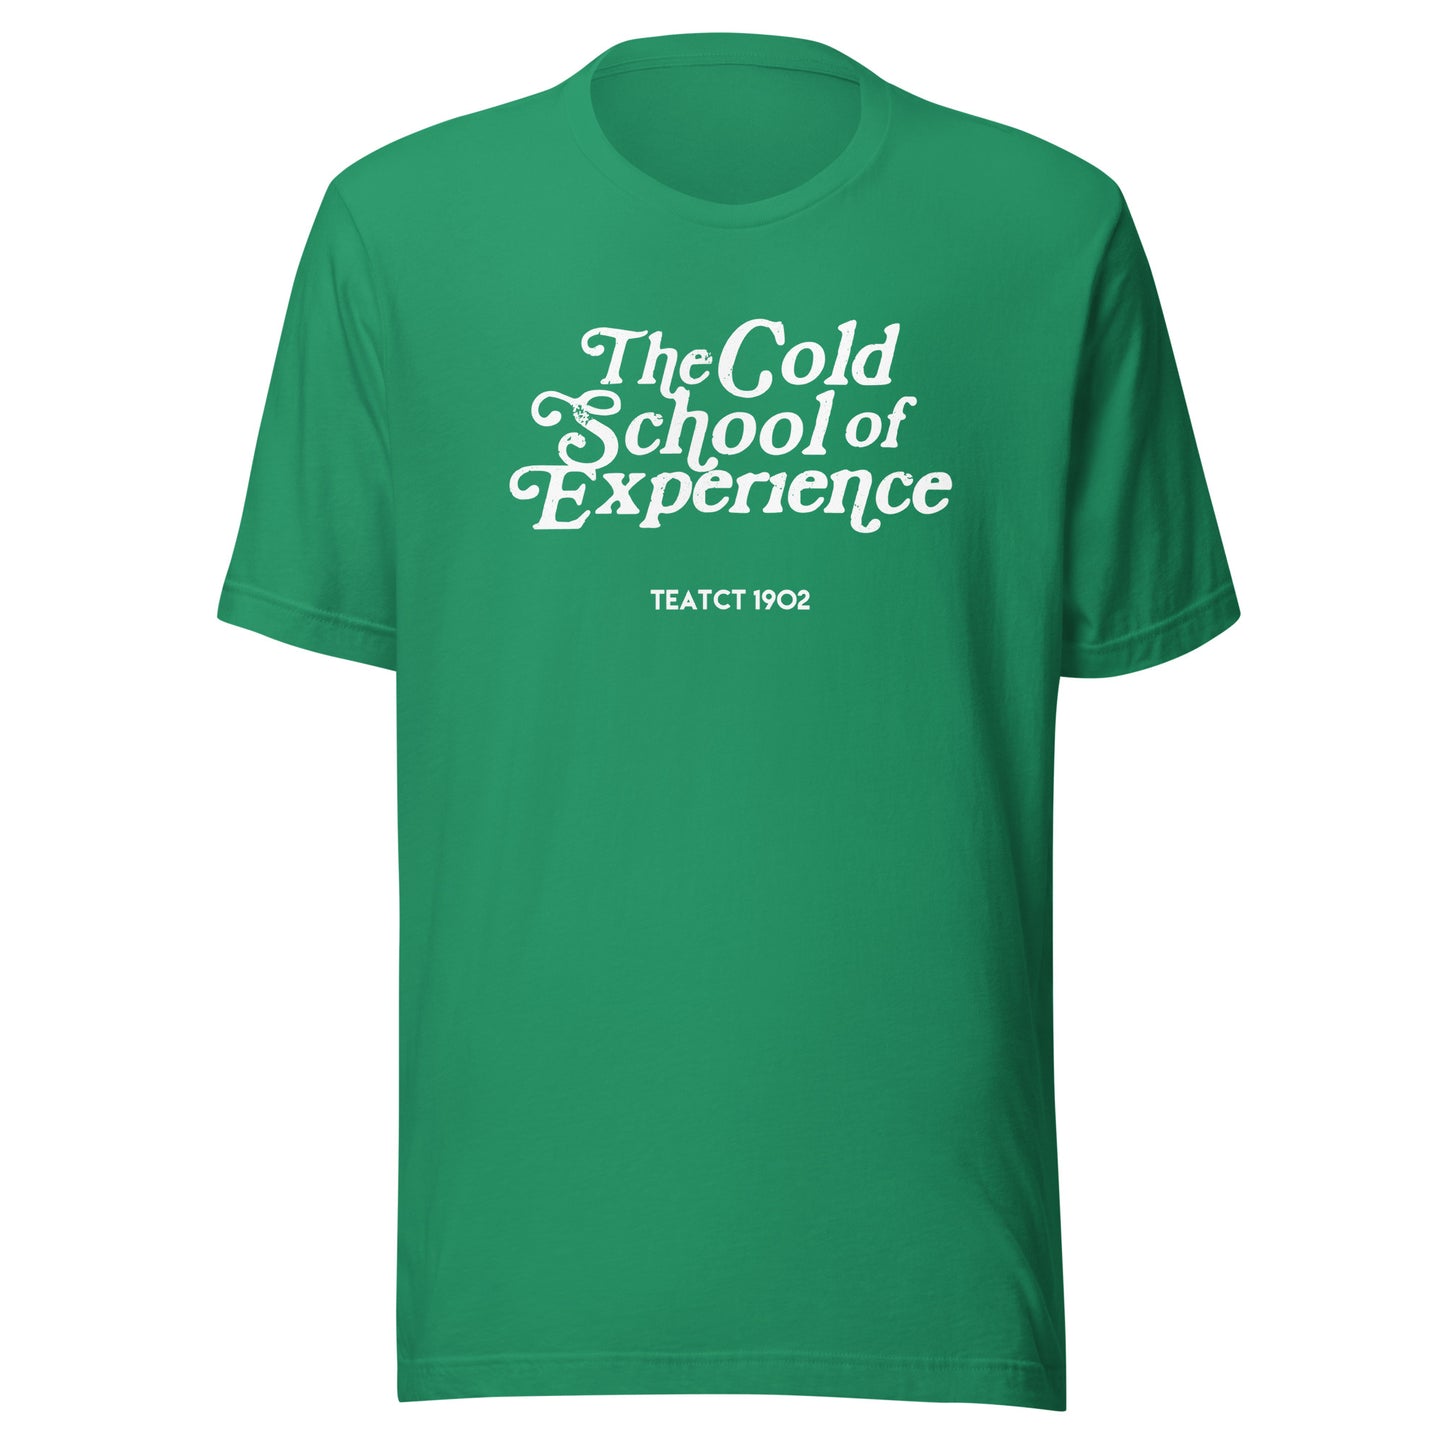 The COLD SCHOOL T-Shirt